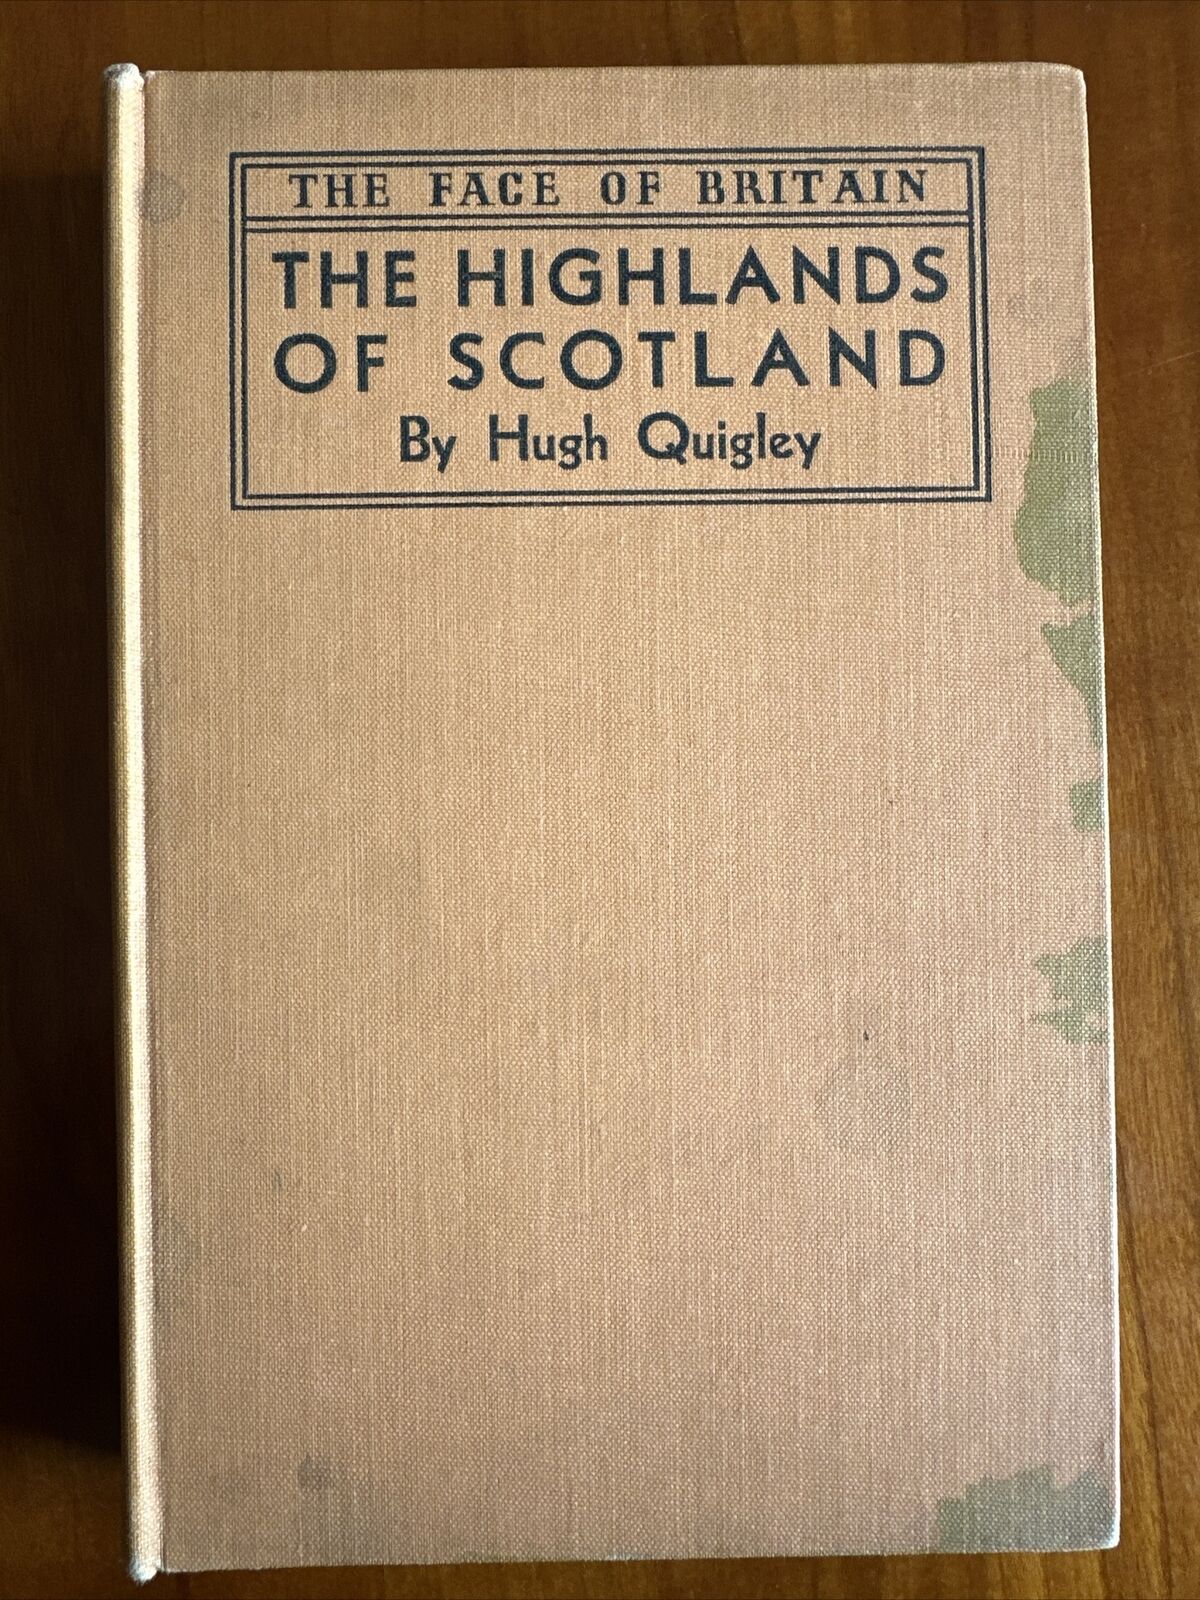 The Highlands of Scotland By Hugh Quigley - 1936 Gorgeous Photogravures